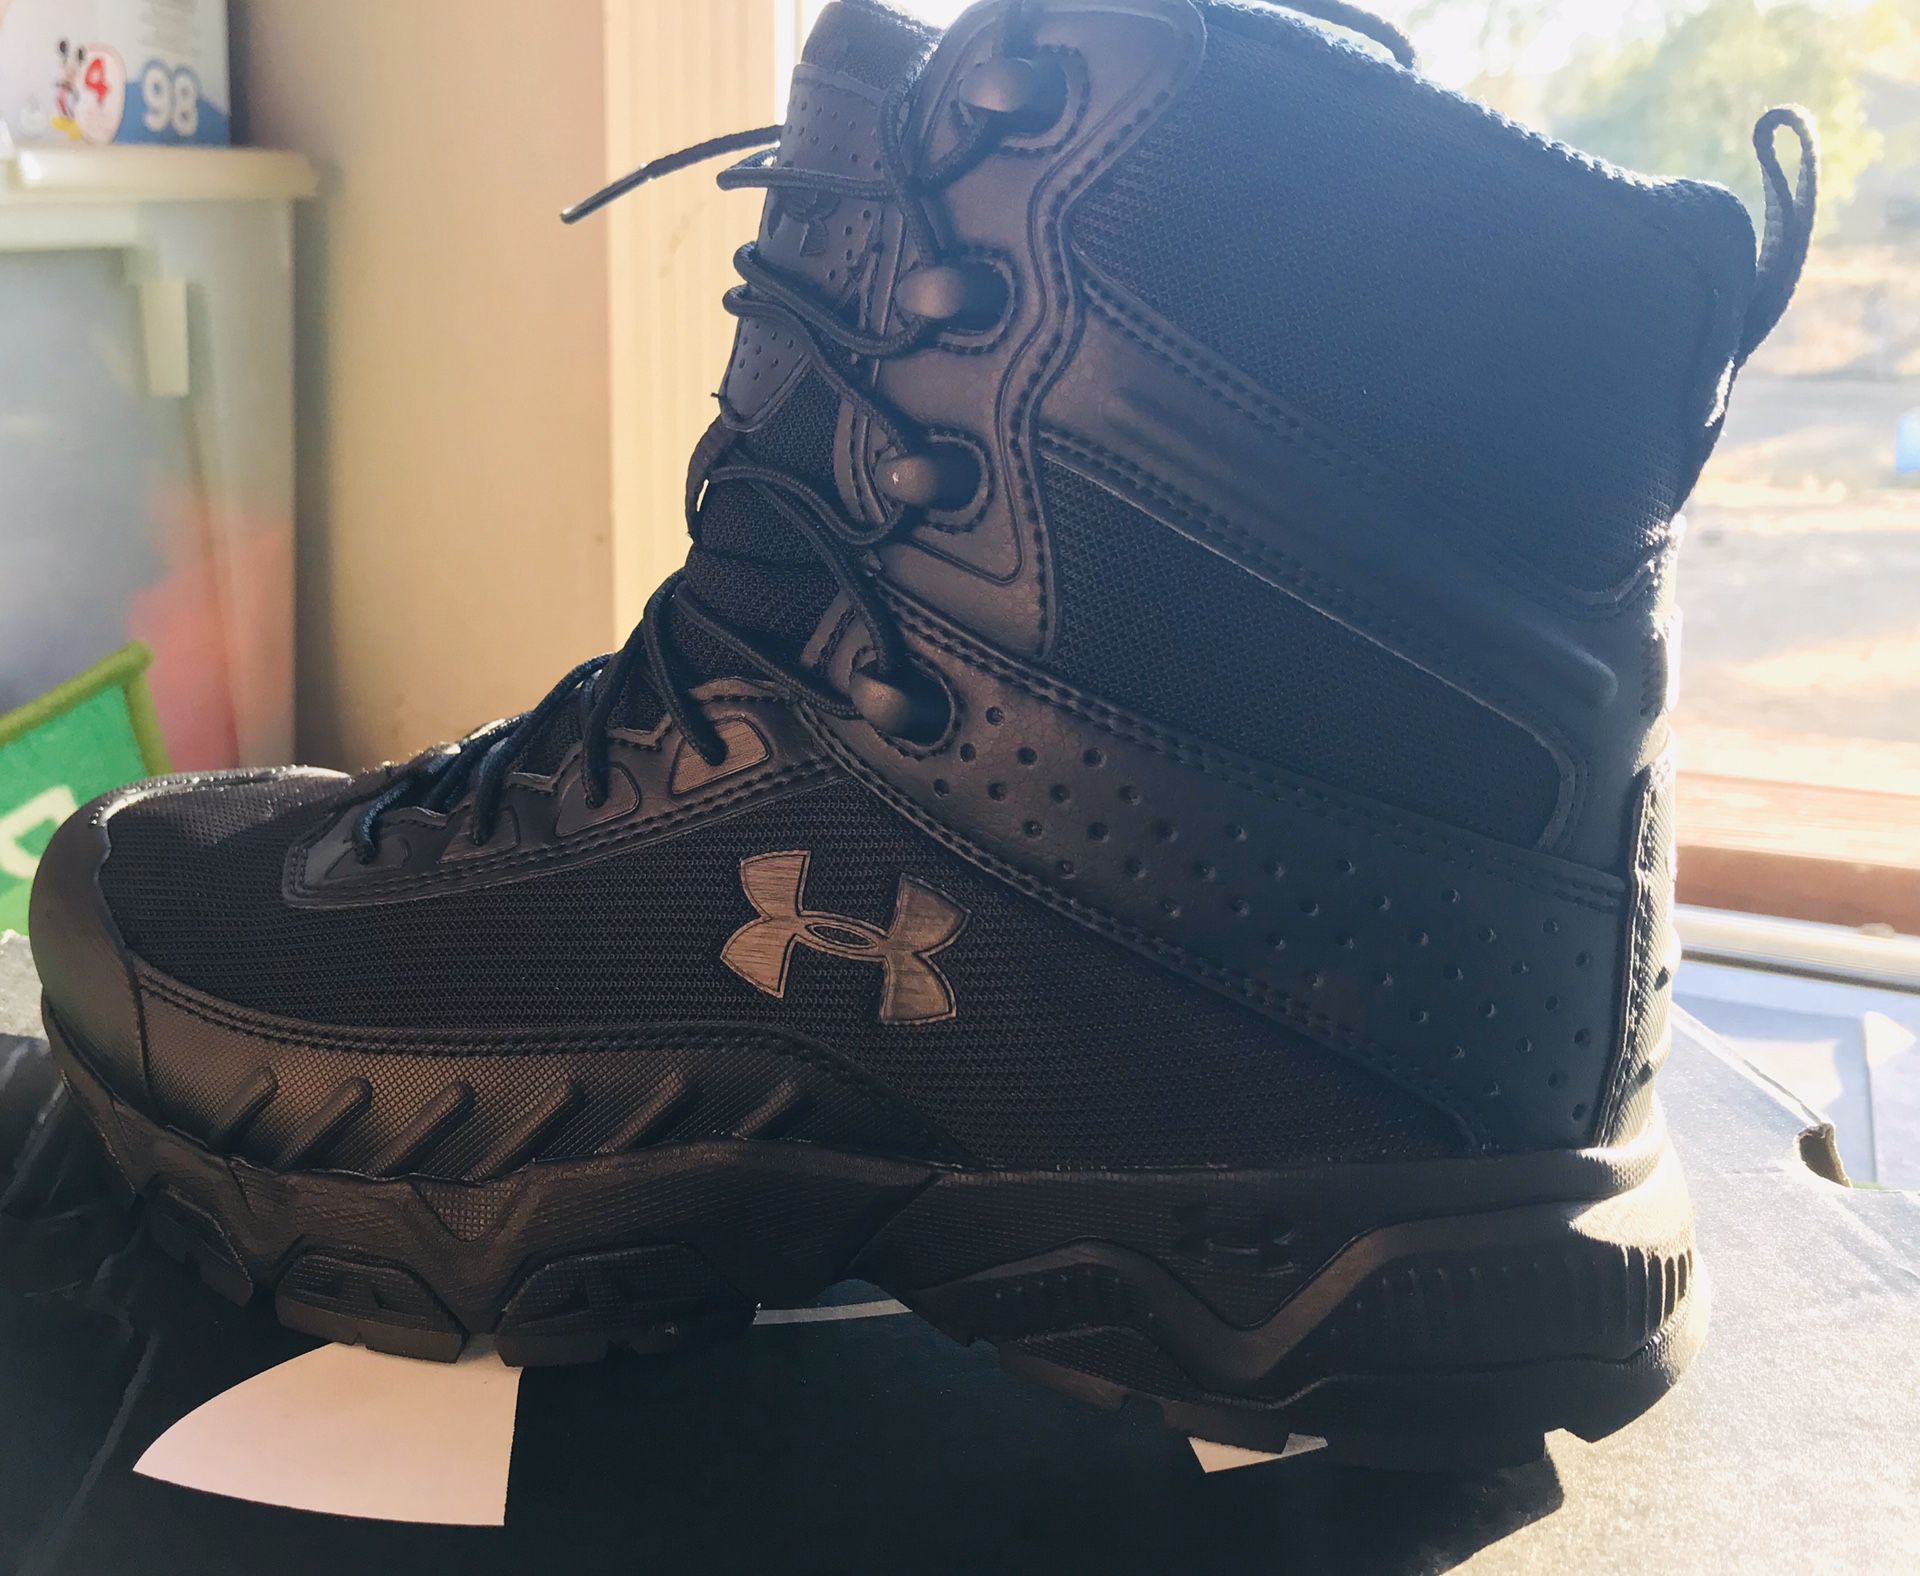 New Men’s Under Armour Boots